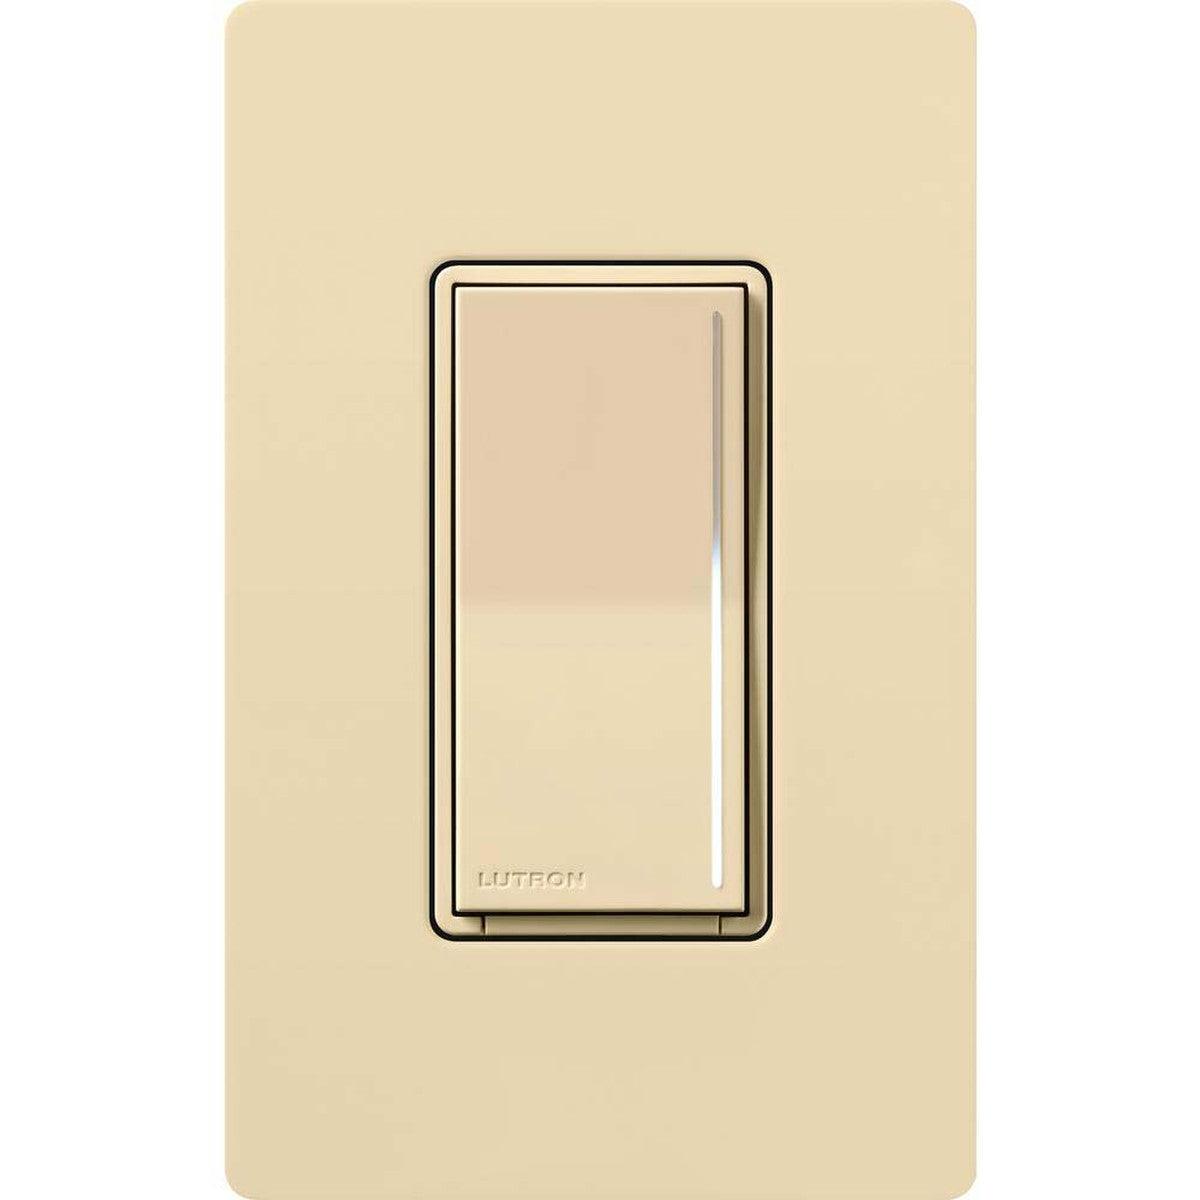 Lutron Sunnata Dimmer Switches and Light Switches